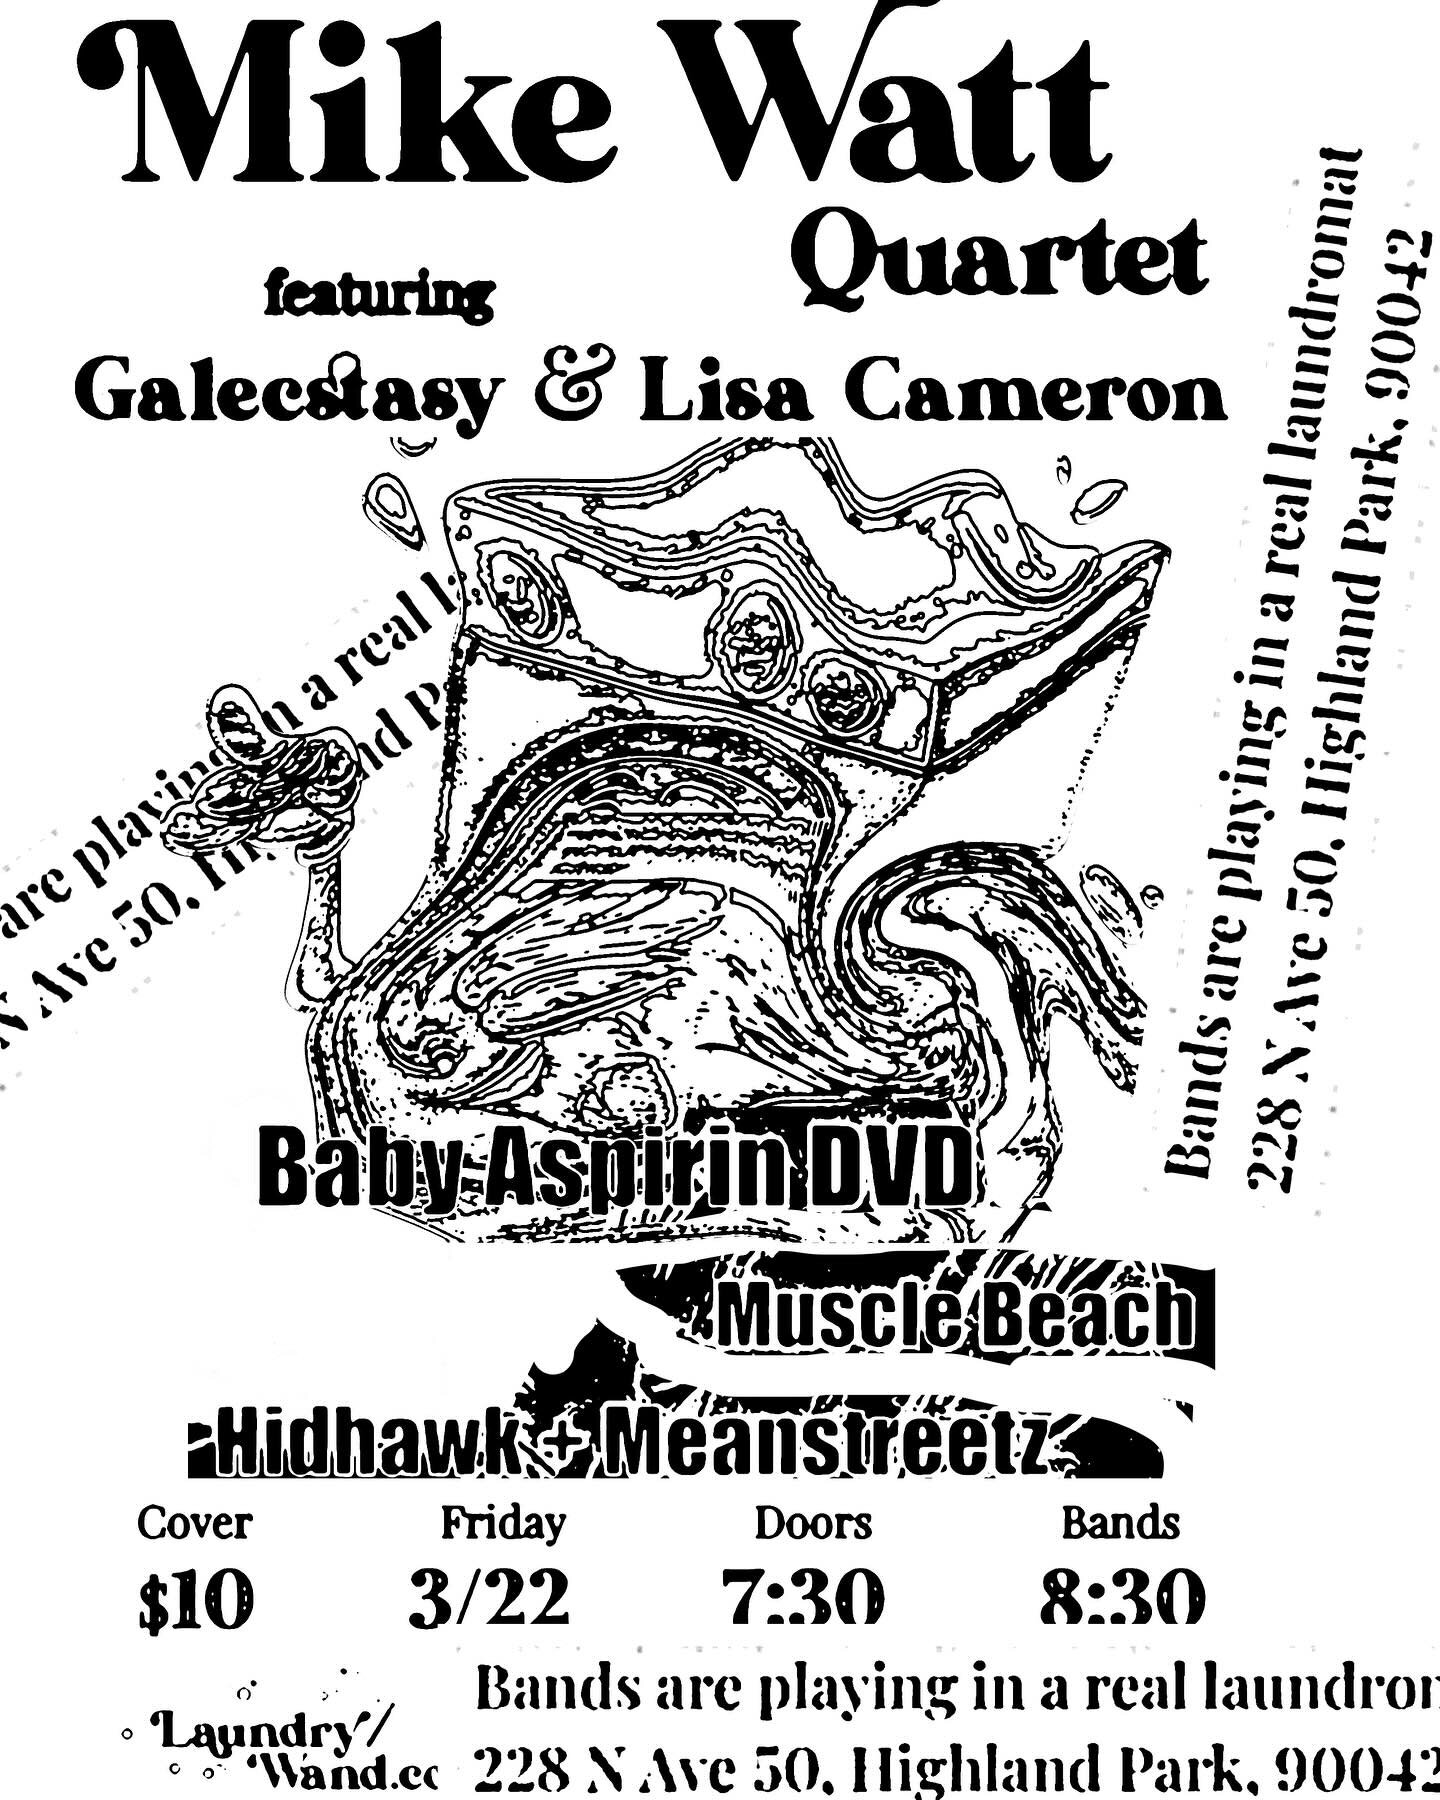 A legendary night of music in Los Angeles with Extra Special Guests in a real Laundromat
3/22/2024
Mike Watt Quartet with Galecstasy &amp; Lisa Cameron